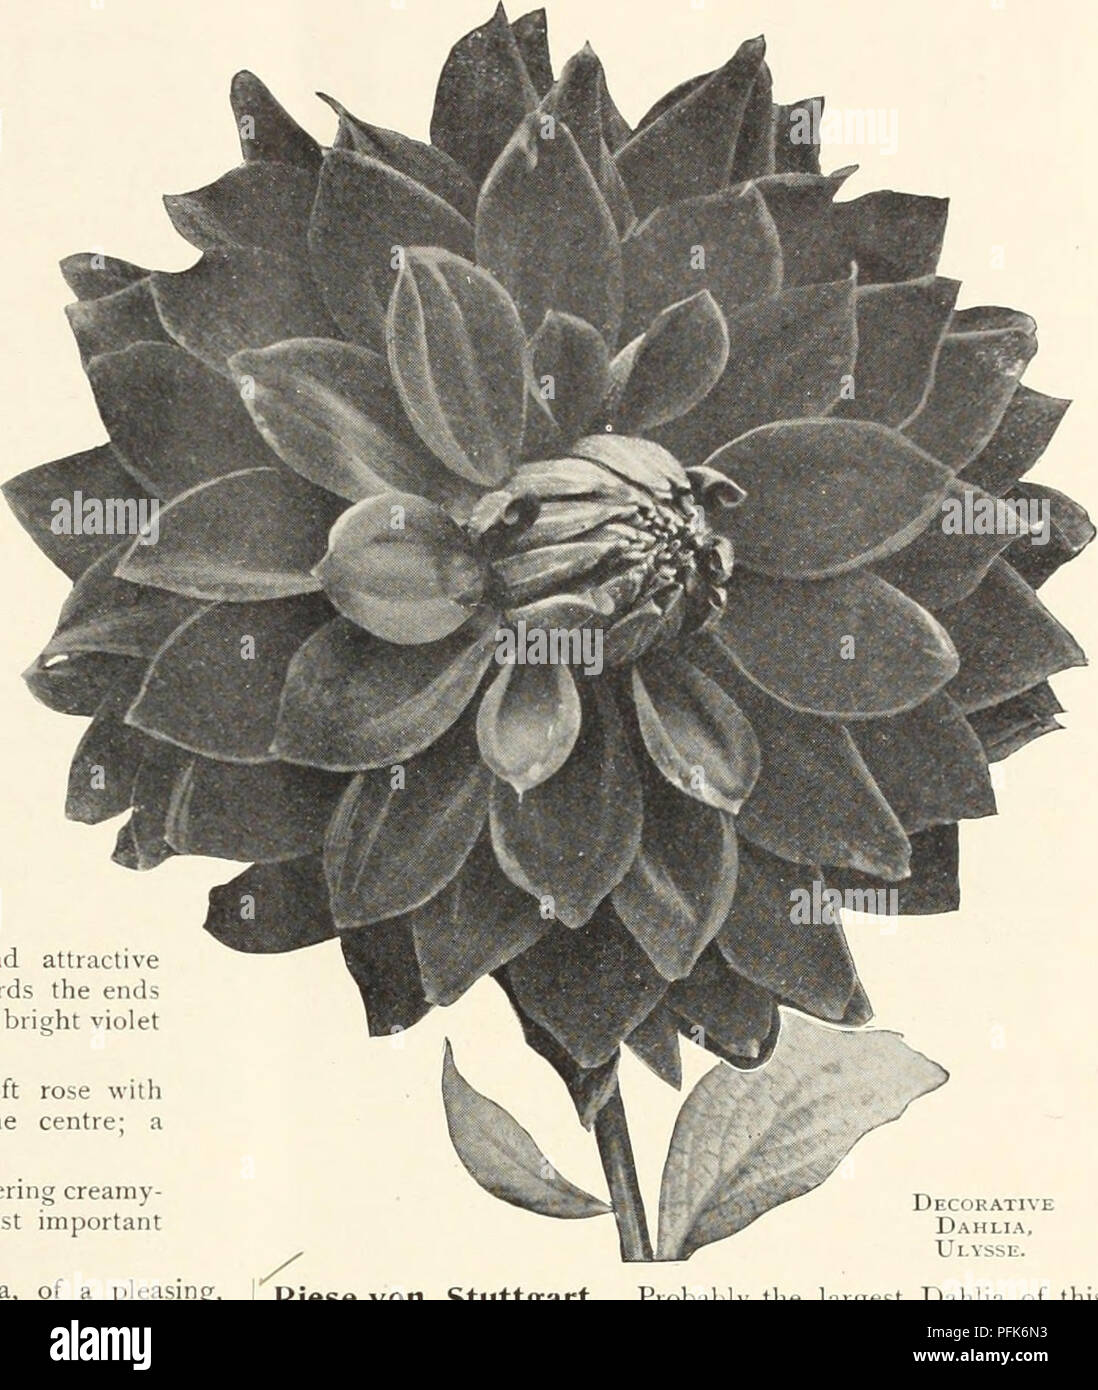 . Dahlias. Flowers Seeds Catalogs; Nurseries (Horticulture) Catalogs; Dahlias Seeds Catalogs. SPECIAL DAHLIA CATALOGUE 21 Select Decorative Dahlias Continued ^ Mammouth. A very large flower, fre- quently 7 inches in diameter on good long stems of a bright scarlet. Plants ready April loth. 50 cts. each. /^ Manzanola. Brilliant oriental-red witli deeper shadings, a fine shaped flower witli good stem, very free and ideal for cutting. Plants ready April 1.5th. 35 cts. each. V Manzanita. Entirely distinct in coloring from all others, described by the introducer as a rich lavender; with us it has be Stock Photo